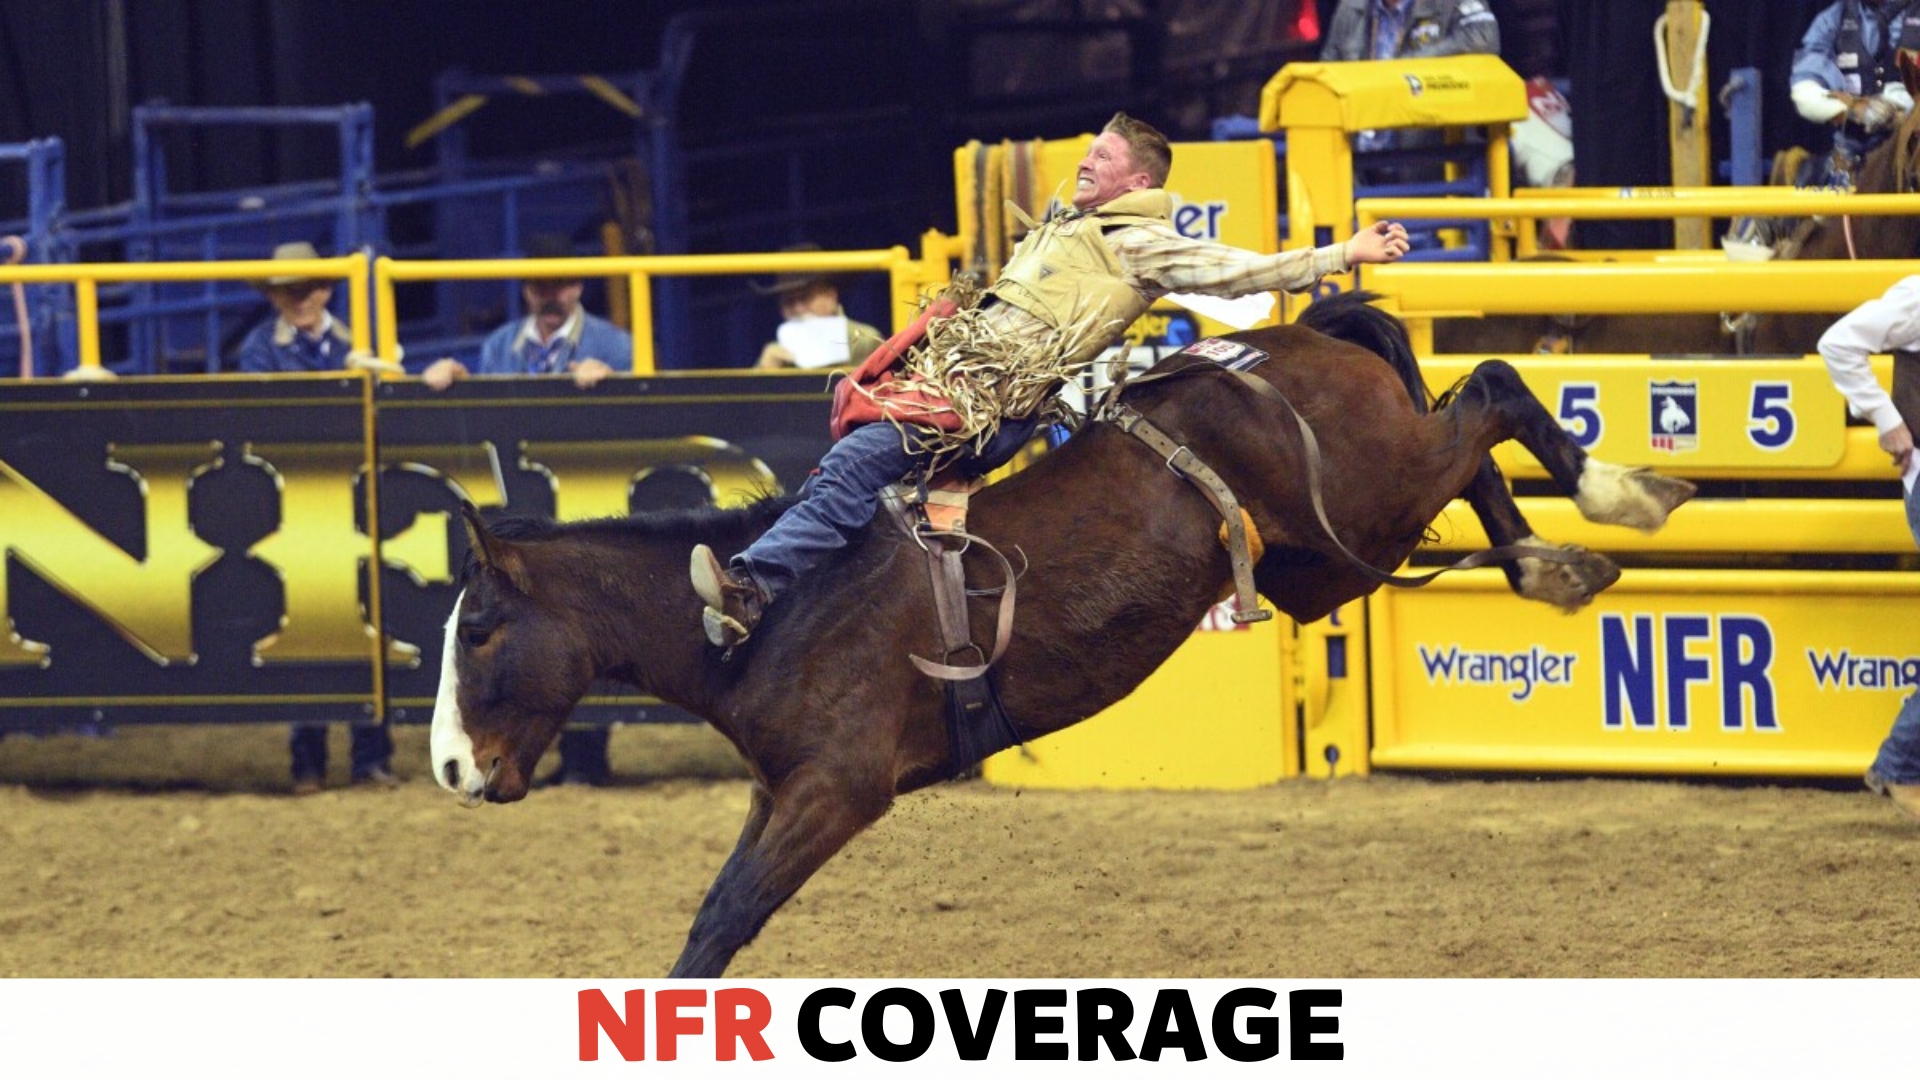 Where is the Best Place to Buy Nfr Tickets